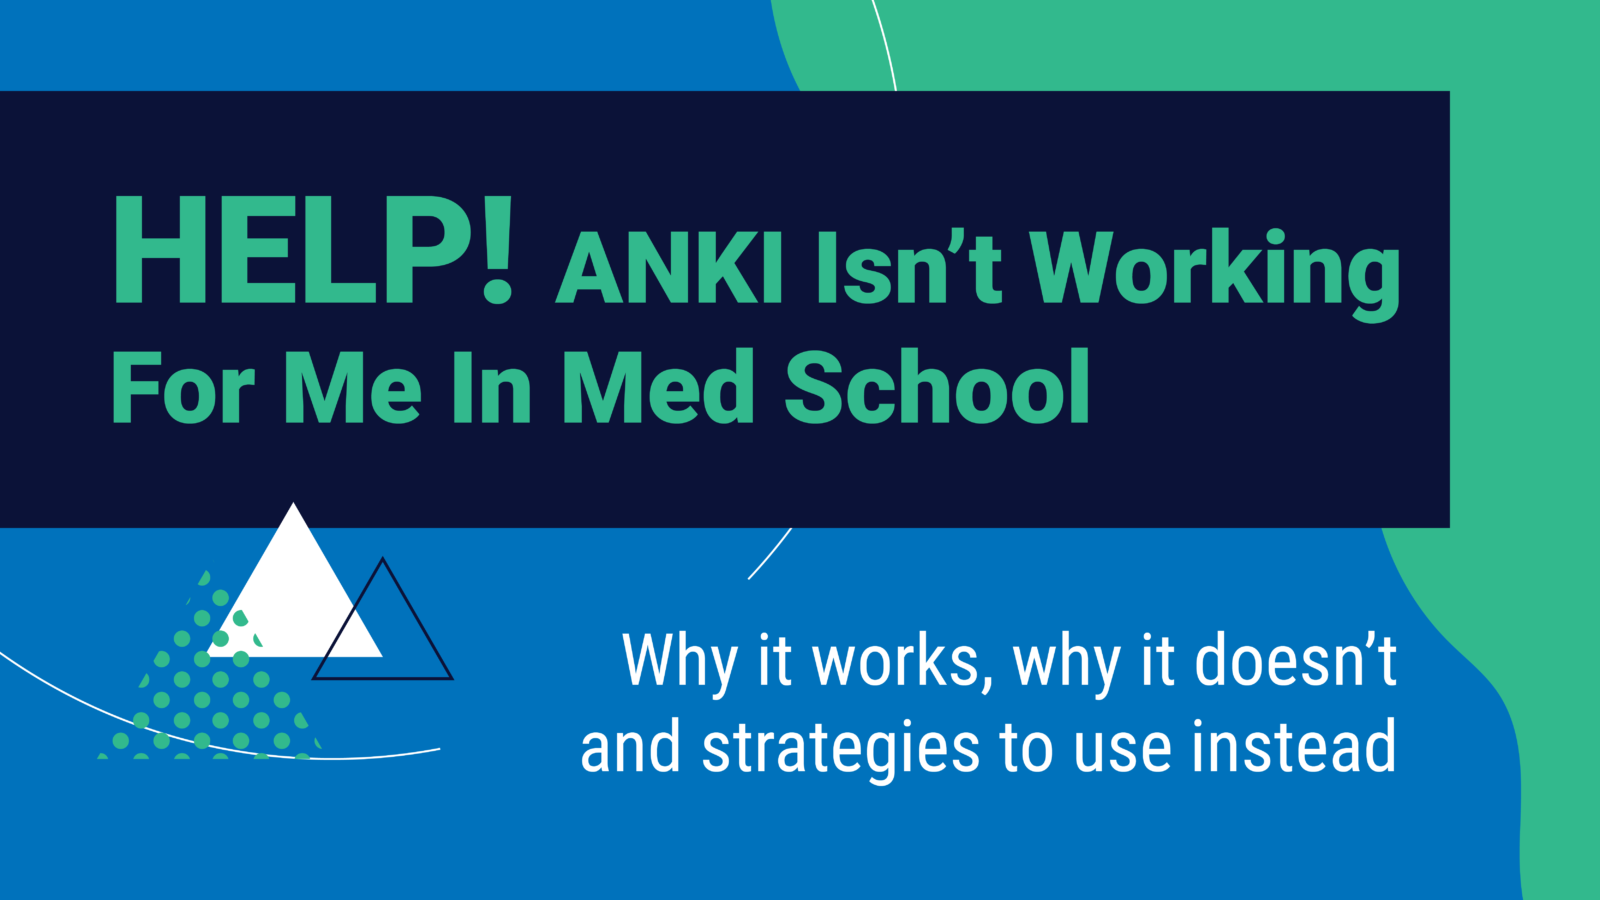 Blue and green geographic design with the words: Help! Anki Isn't Working For Me In Med School